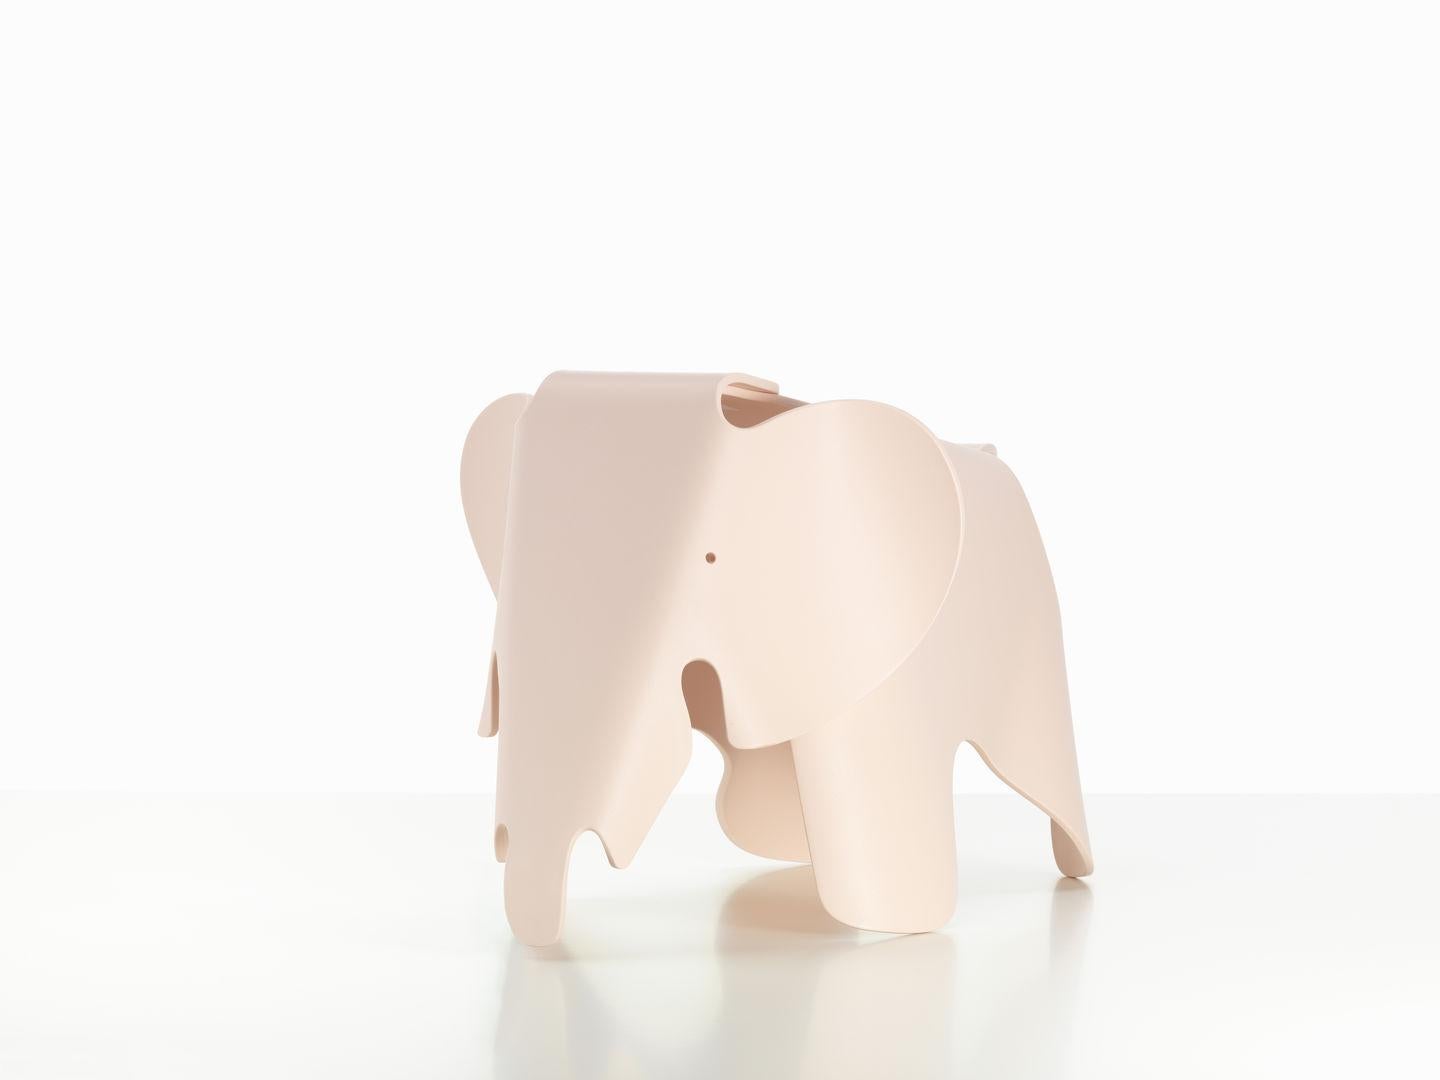 These items are currently only available in the United States.

Charles and Ray Eames developed a toy elephant made of plywood in 1945. Manufactured in plastic, the Eames elephant can now be enjoyed by the target group for which it was originally